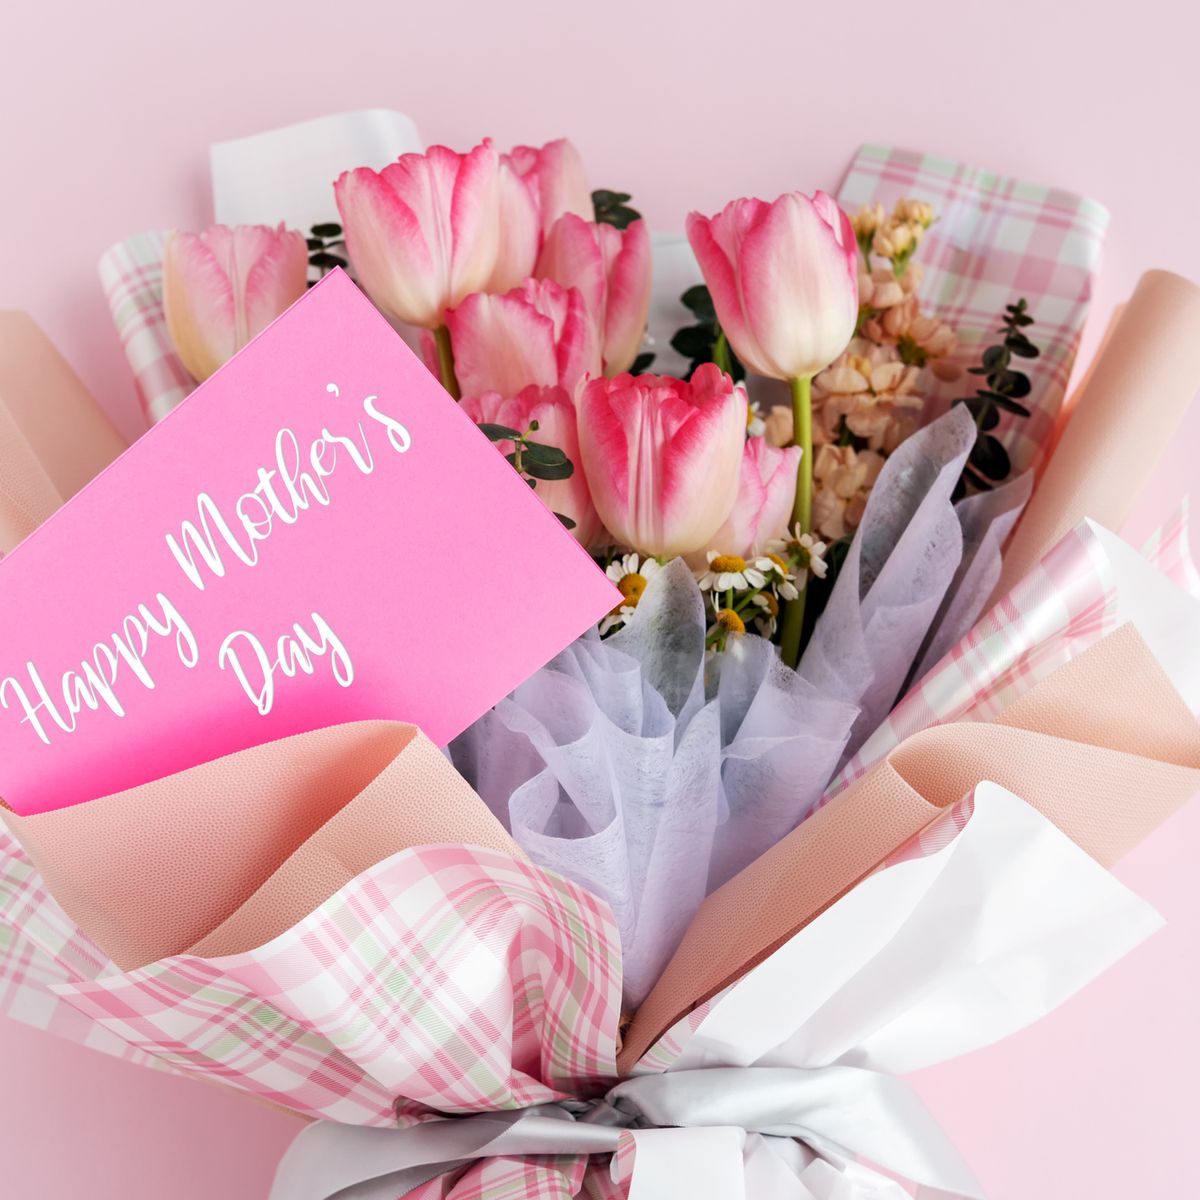 https://hips.hearstapps.com/hmg-prod/images/happy-mothers-day-tulip-bouquet-royalty-free-image-1619449750.?crop=0.668xw:1.00xh;0.0913xw,0.00240xh&resize=1200:*